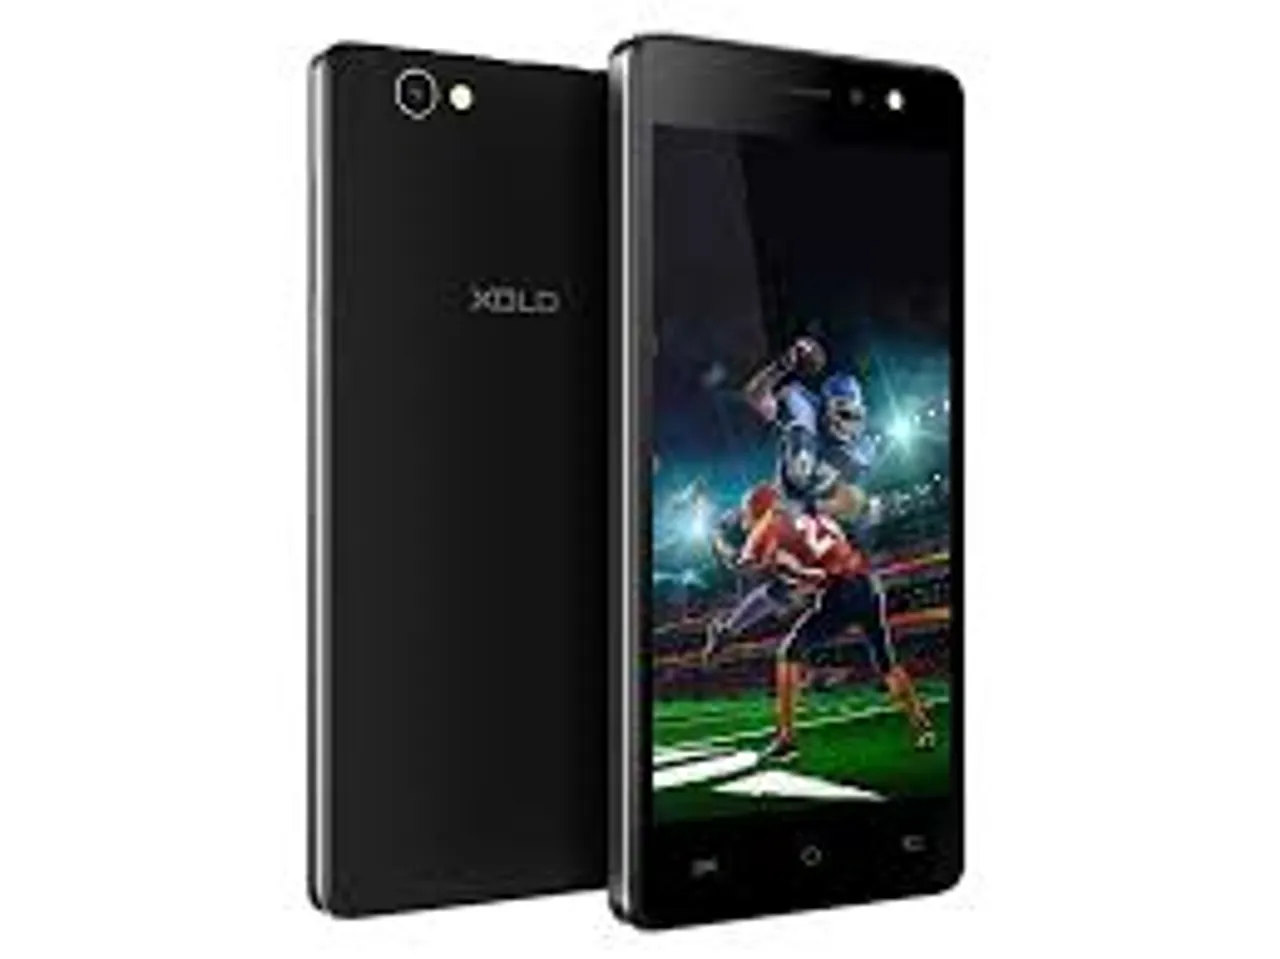 Xolo launches Era X smartphone, priced at Rs 5,777